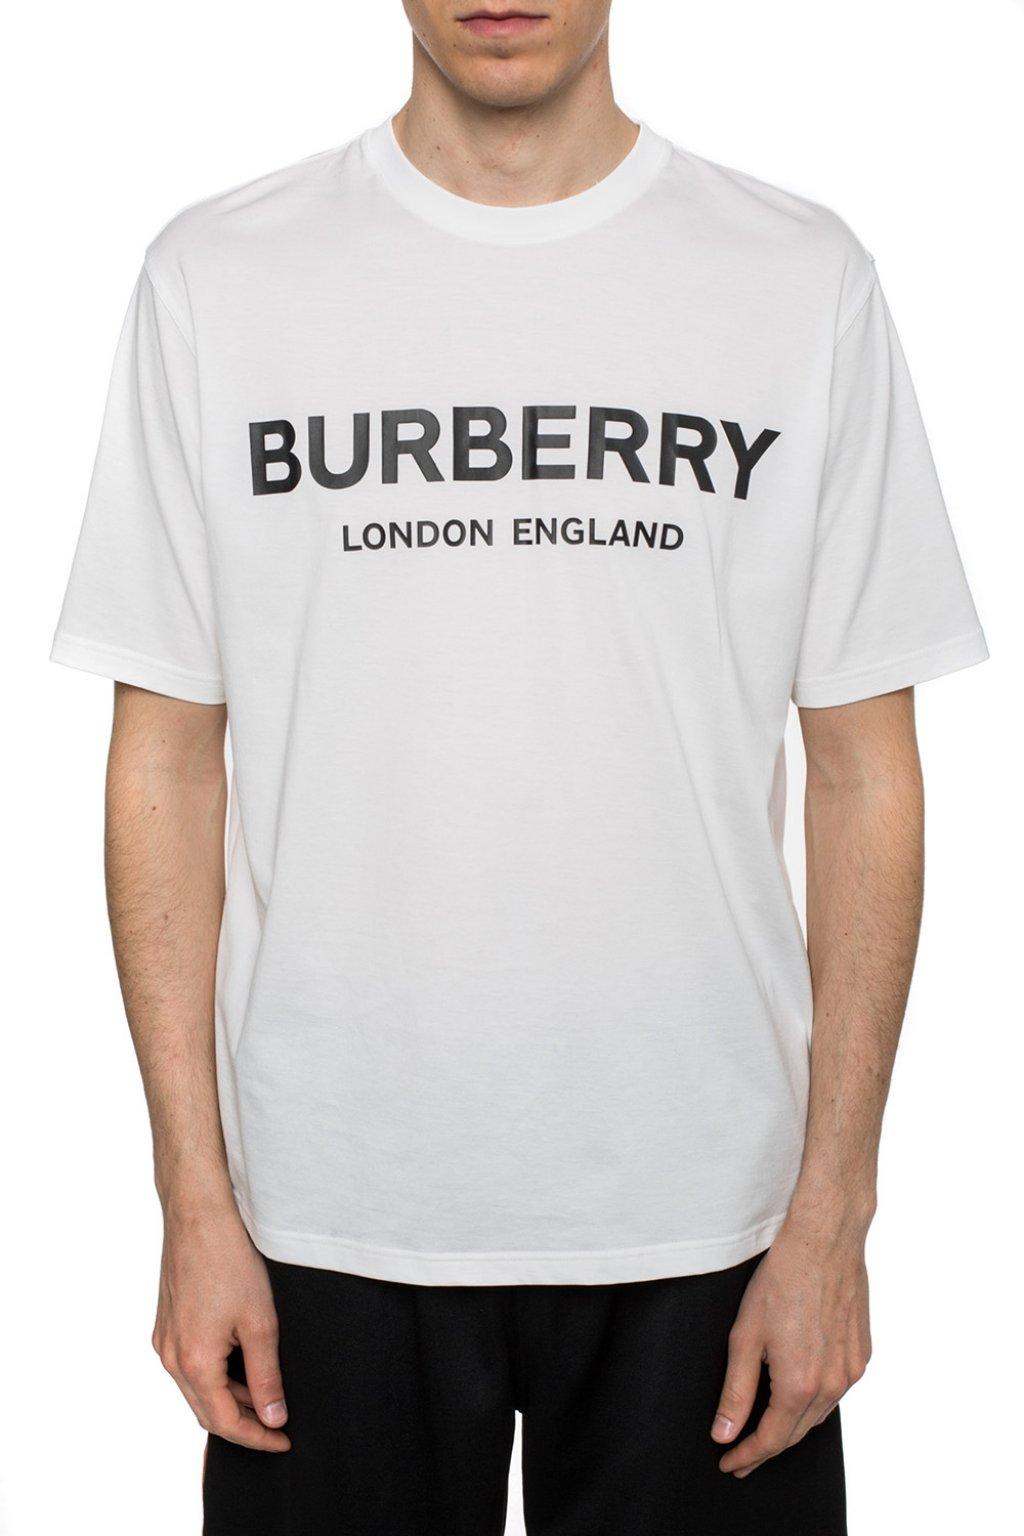 Burberry Cotton Logo-printed T-shirt in White for Men - Lyst